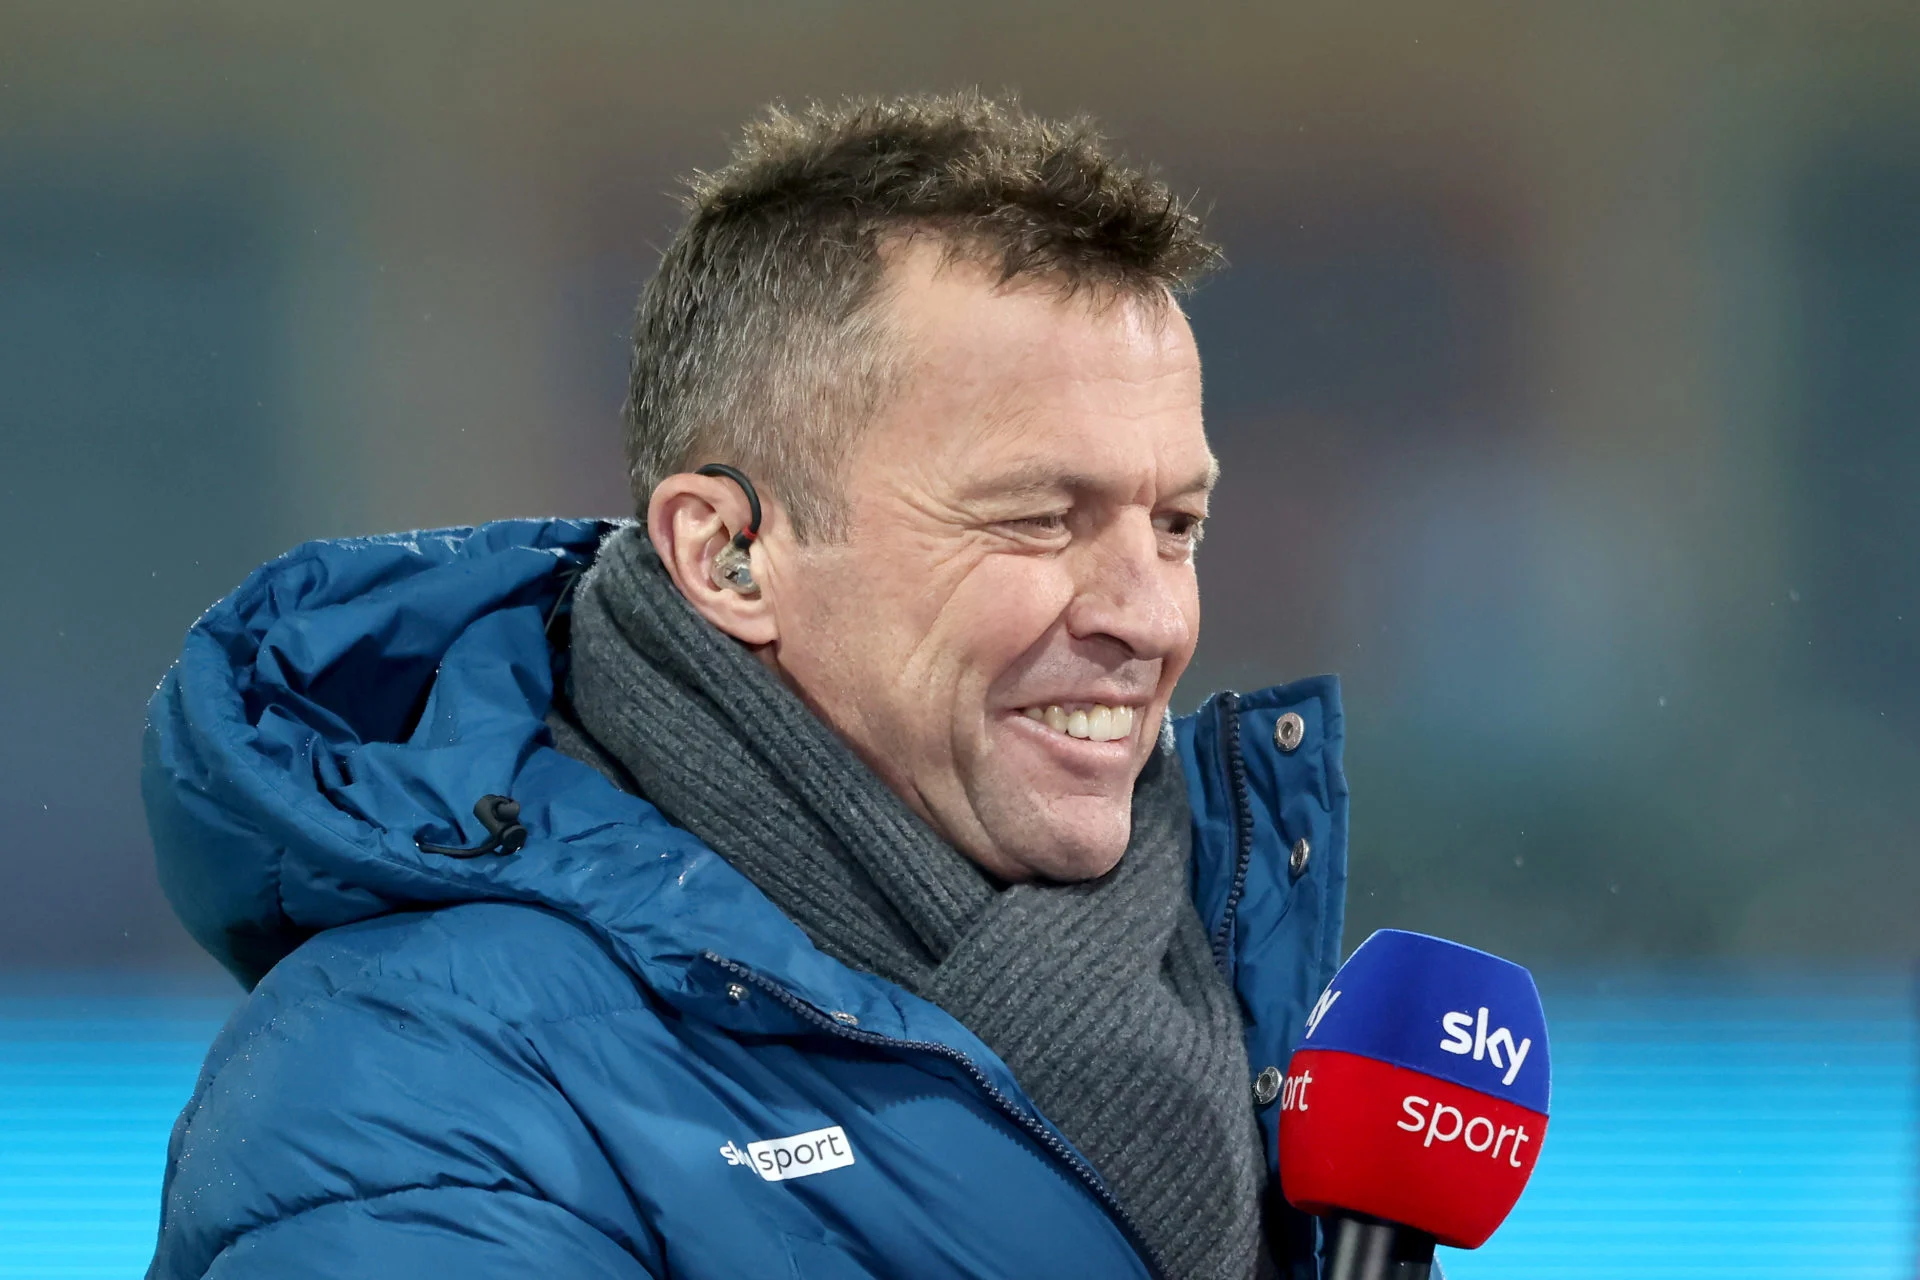 1990 World Cup winning captain and former Inter icon Lothar Matthaus hopes to see top Italian teams back to winning glory on the European stage.